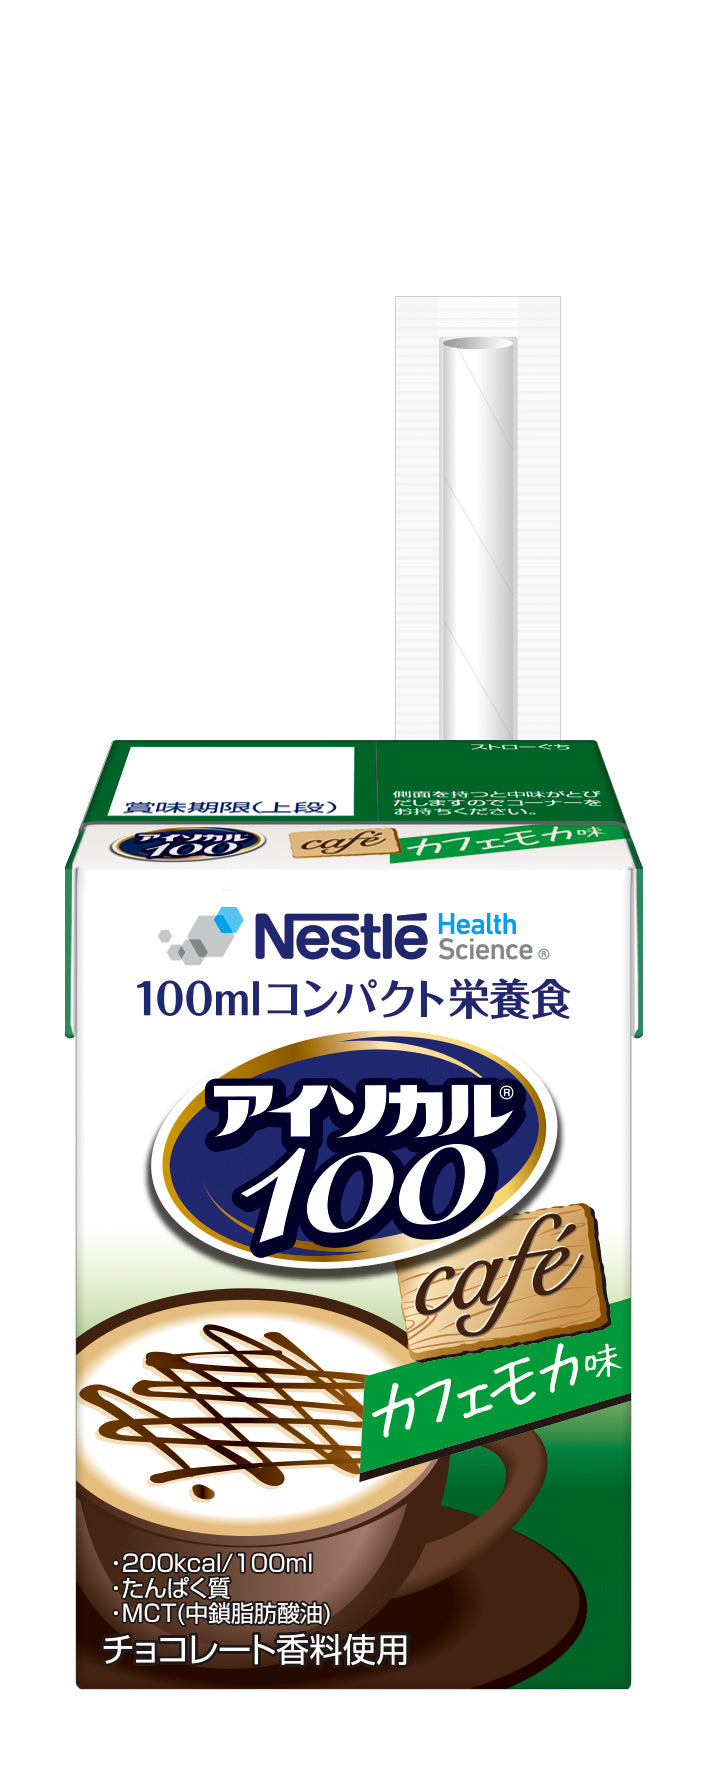 Isocal®100 mini Cafe Mocha Flavour (Best before date: 29 November 2024)